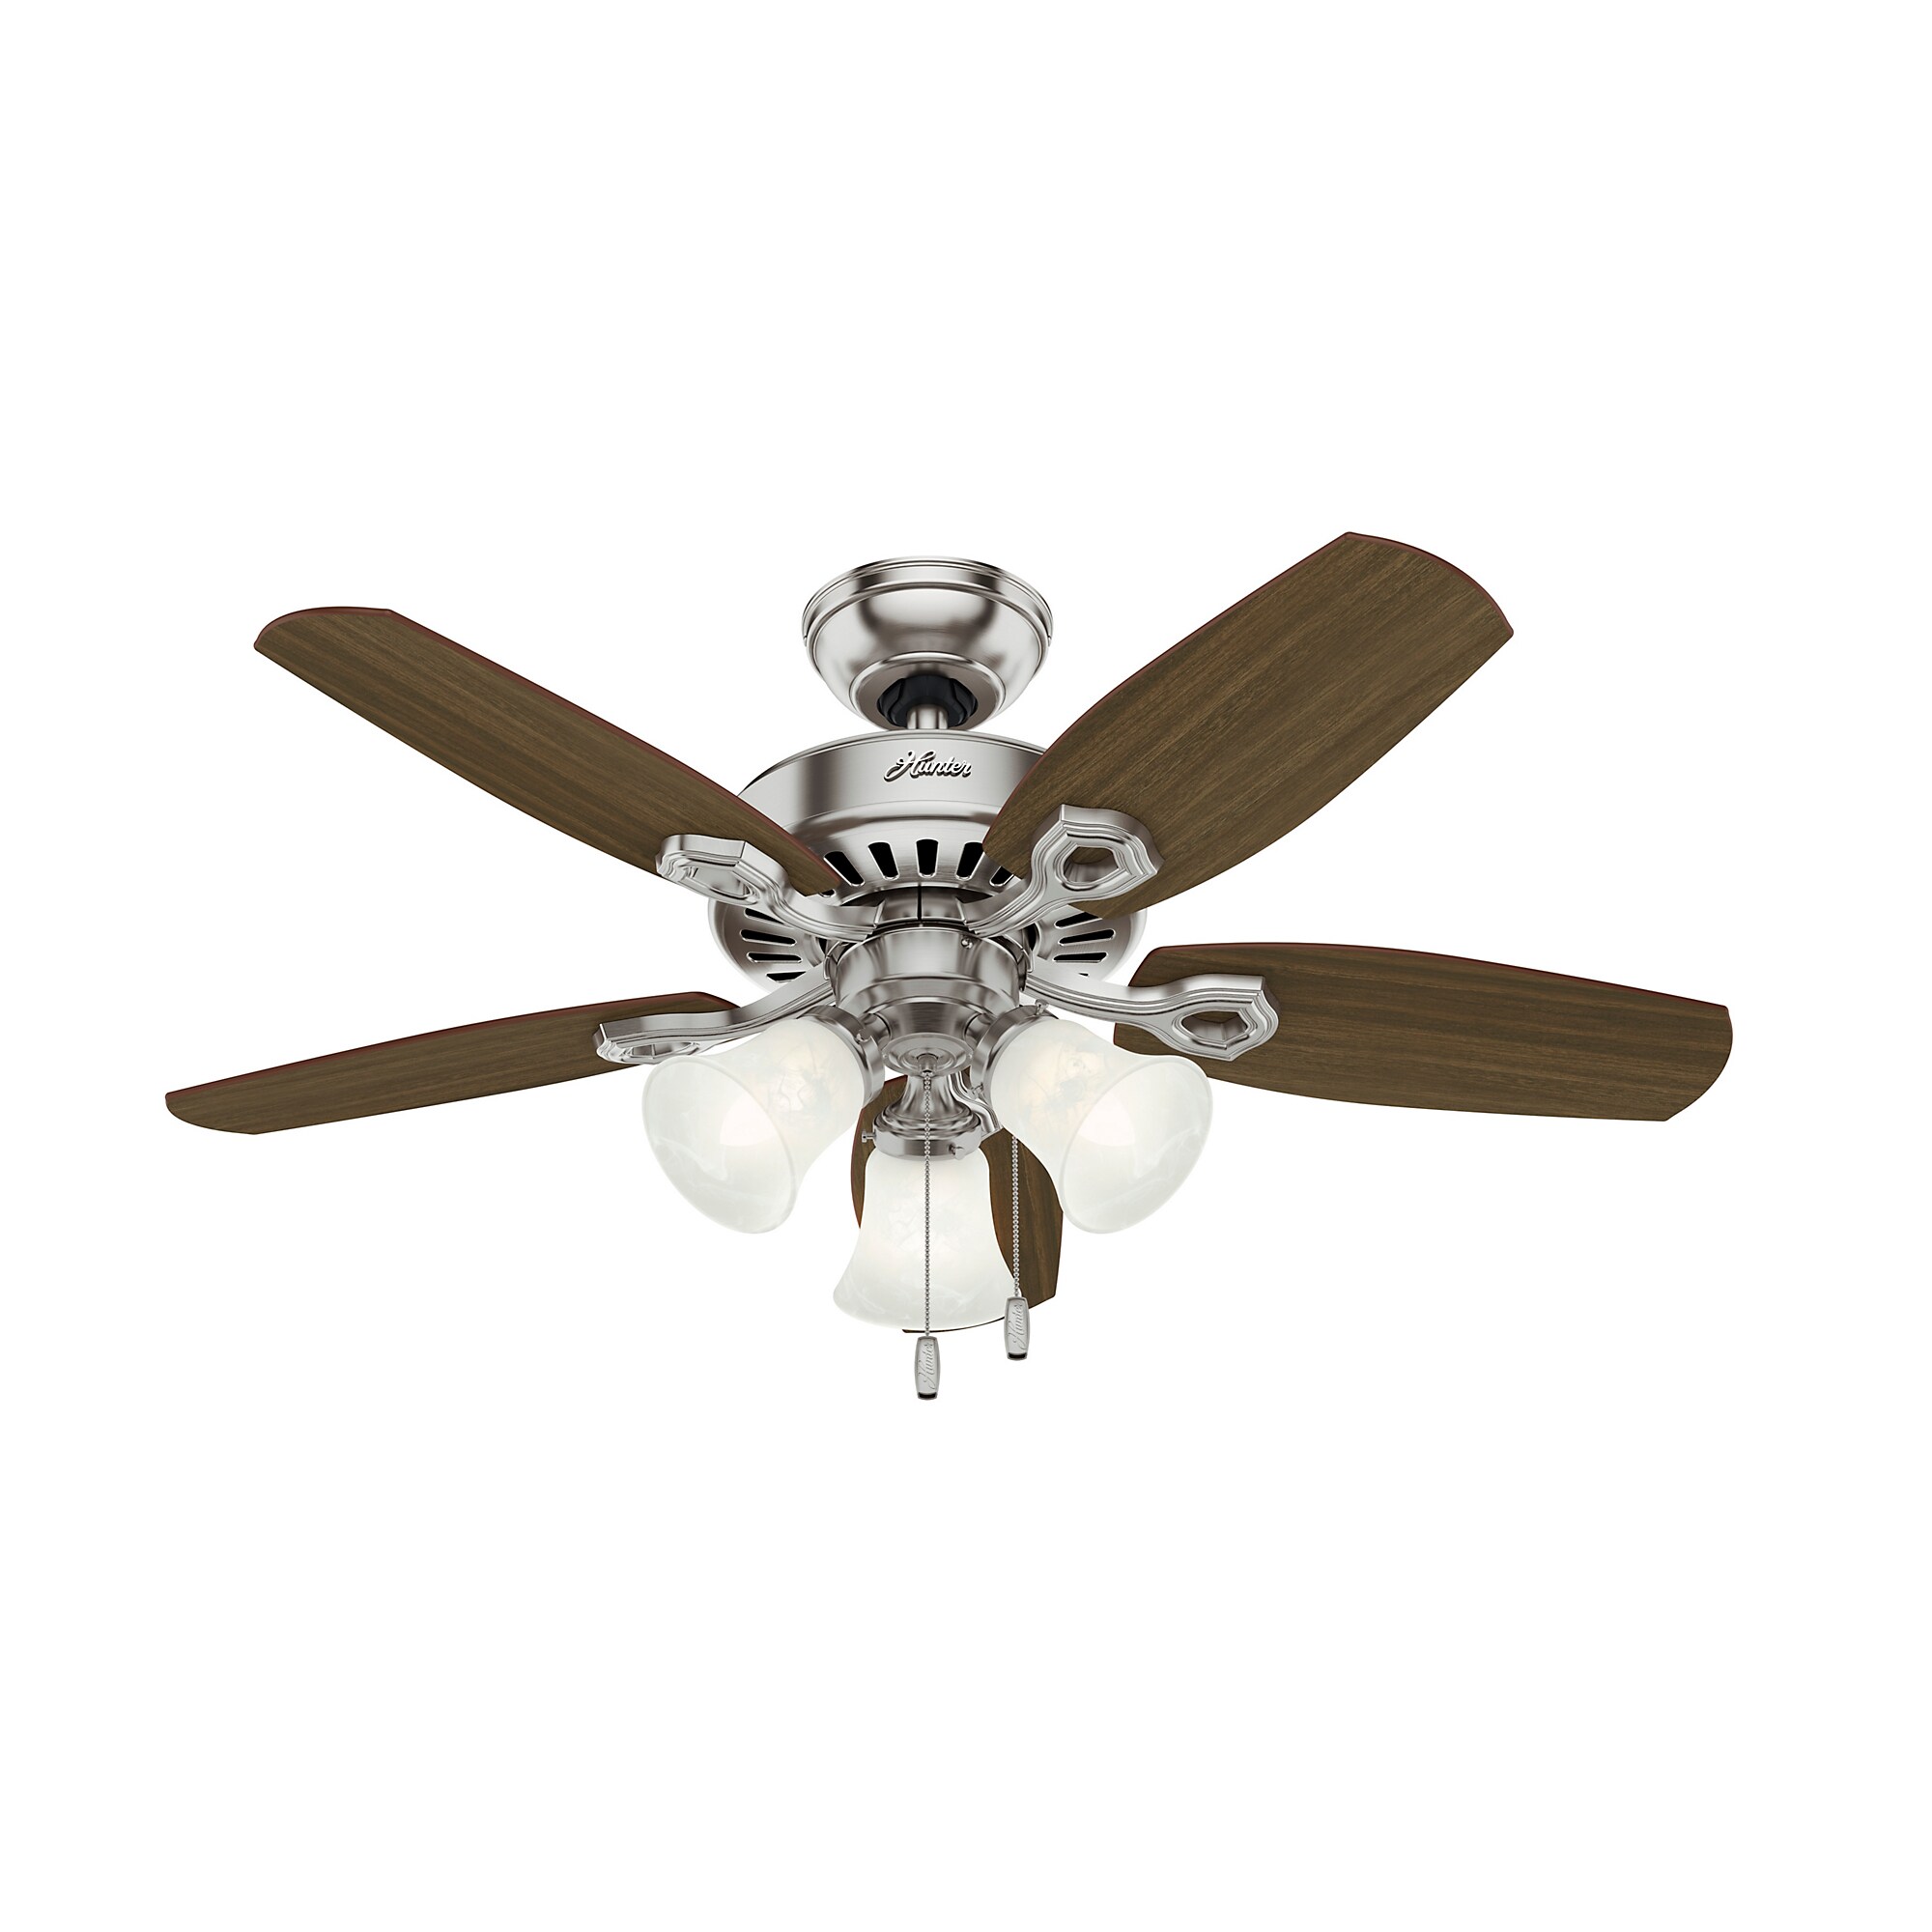 Hunter Builder 42 In Brushed Nickel Indoor Ceiling Fan With Light 5 Blade The Fans Department At Lowes Com